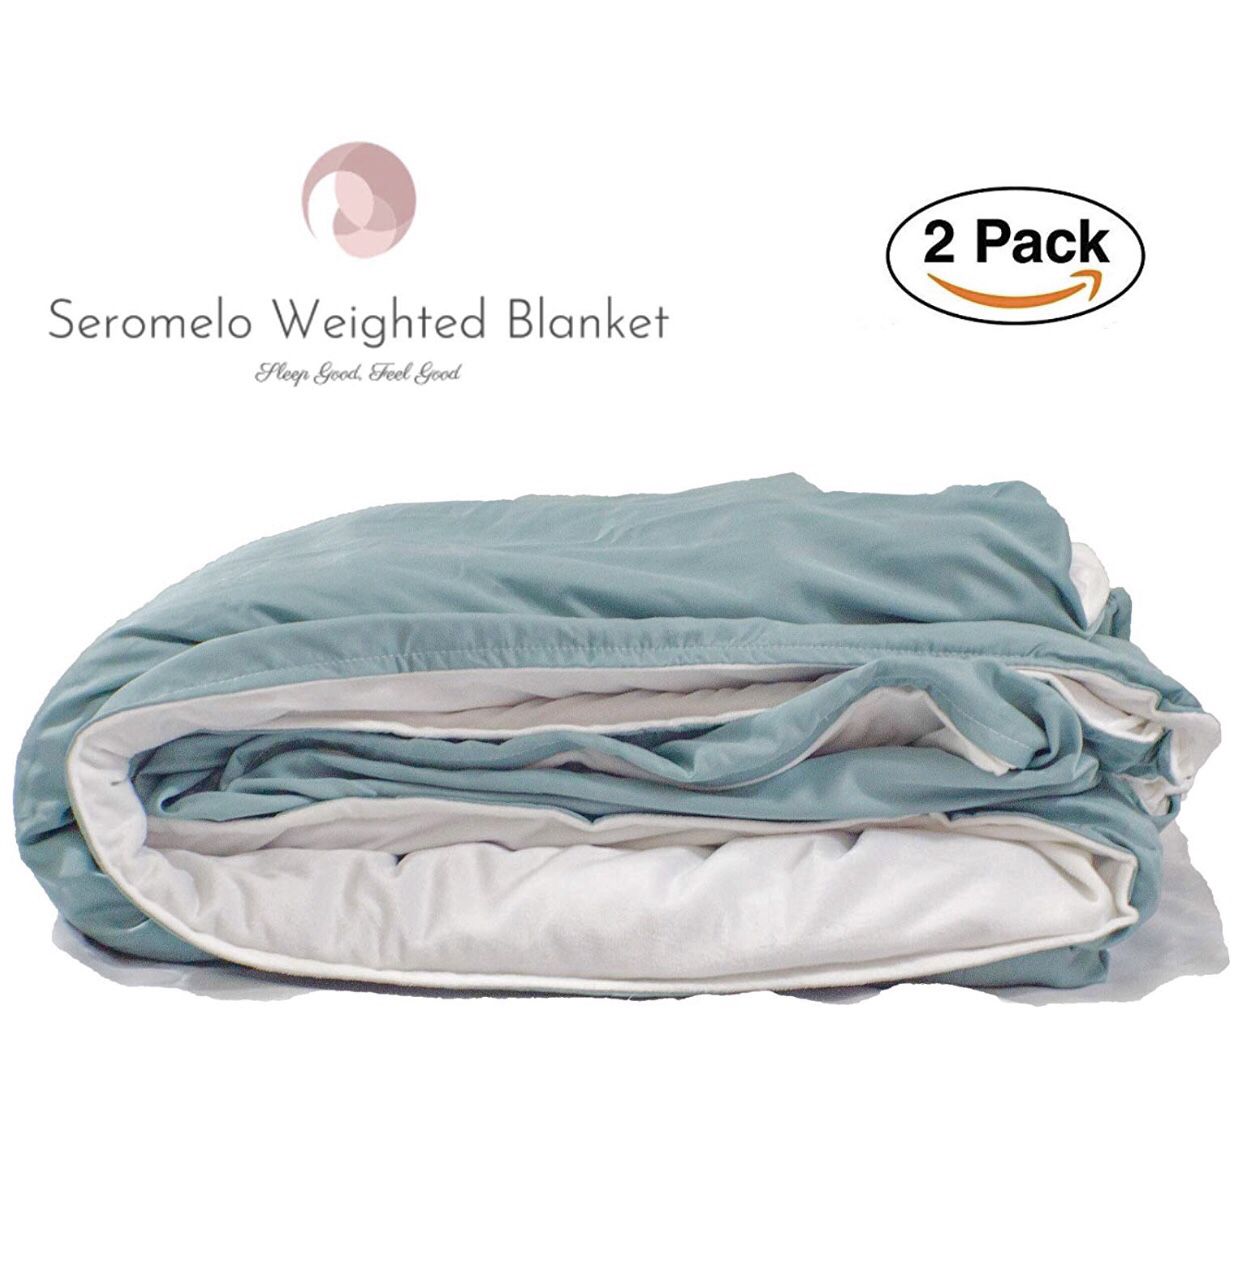 BRAND NEW Sealed Package Weighted Blanket Set | 2-Piece - Seromelo Weighted Blanket 15 lbs 60”x 80” Queen Size | Dual-Sided Bamboo Duvet Cover